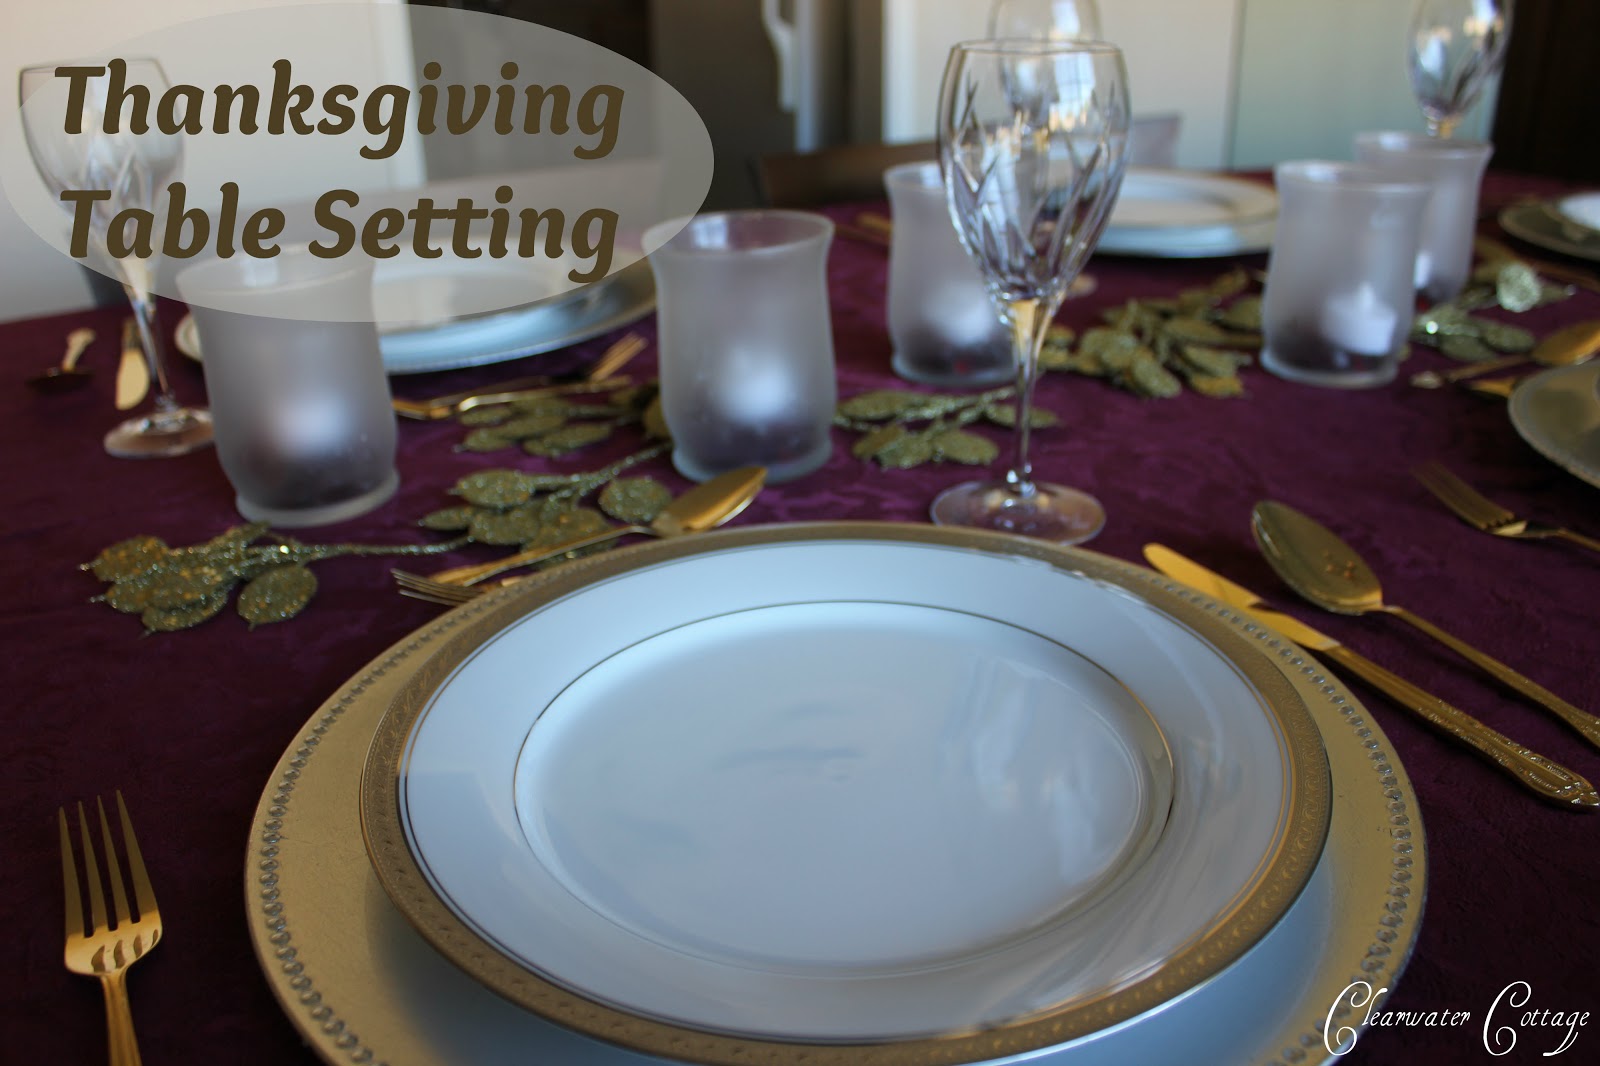 Clearwater Cottage Thanksgiving Table Setting Idea 1